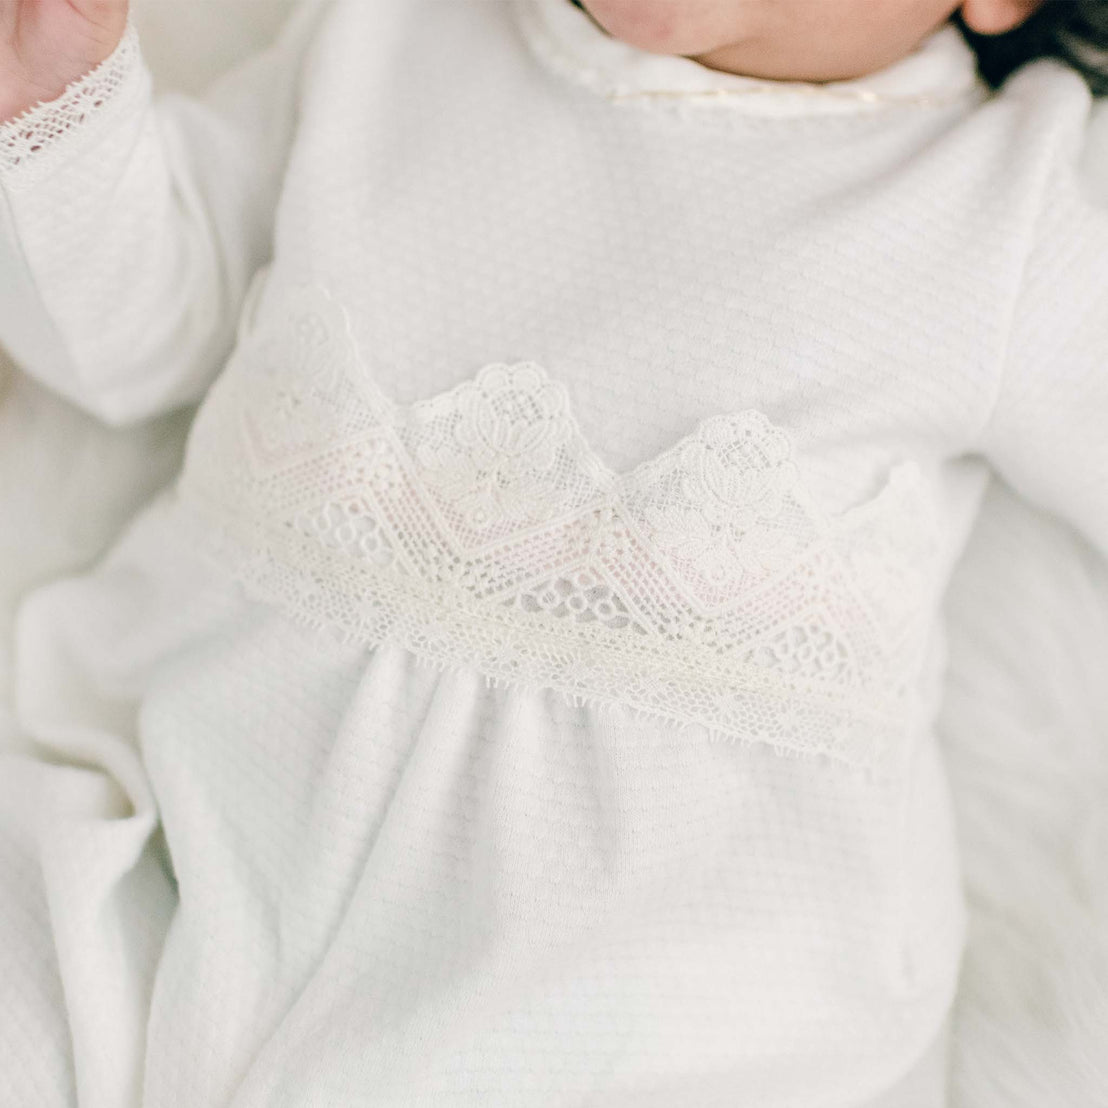 Hailey romper bodice lace detail